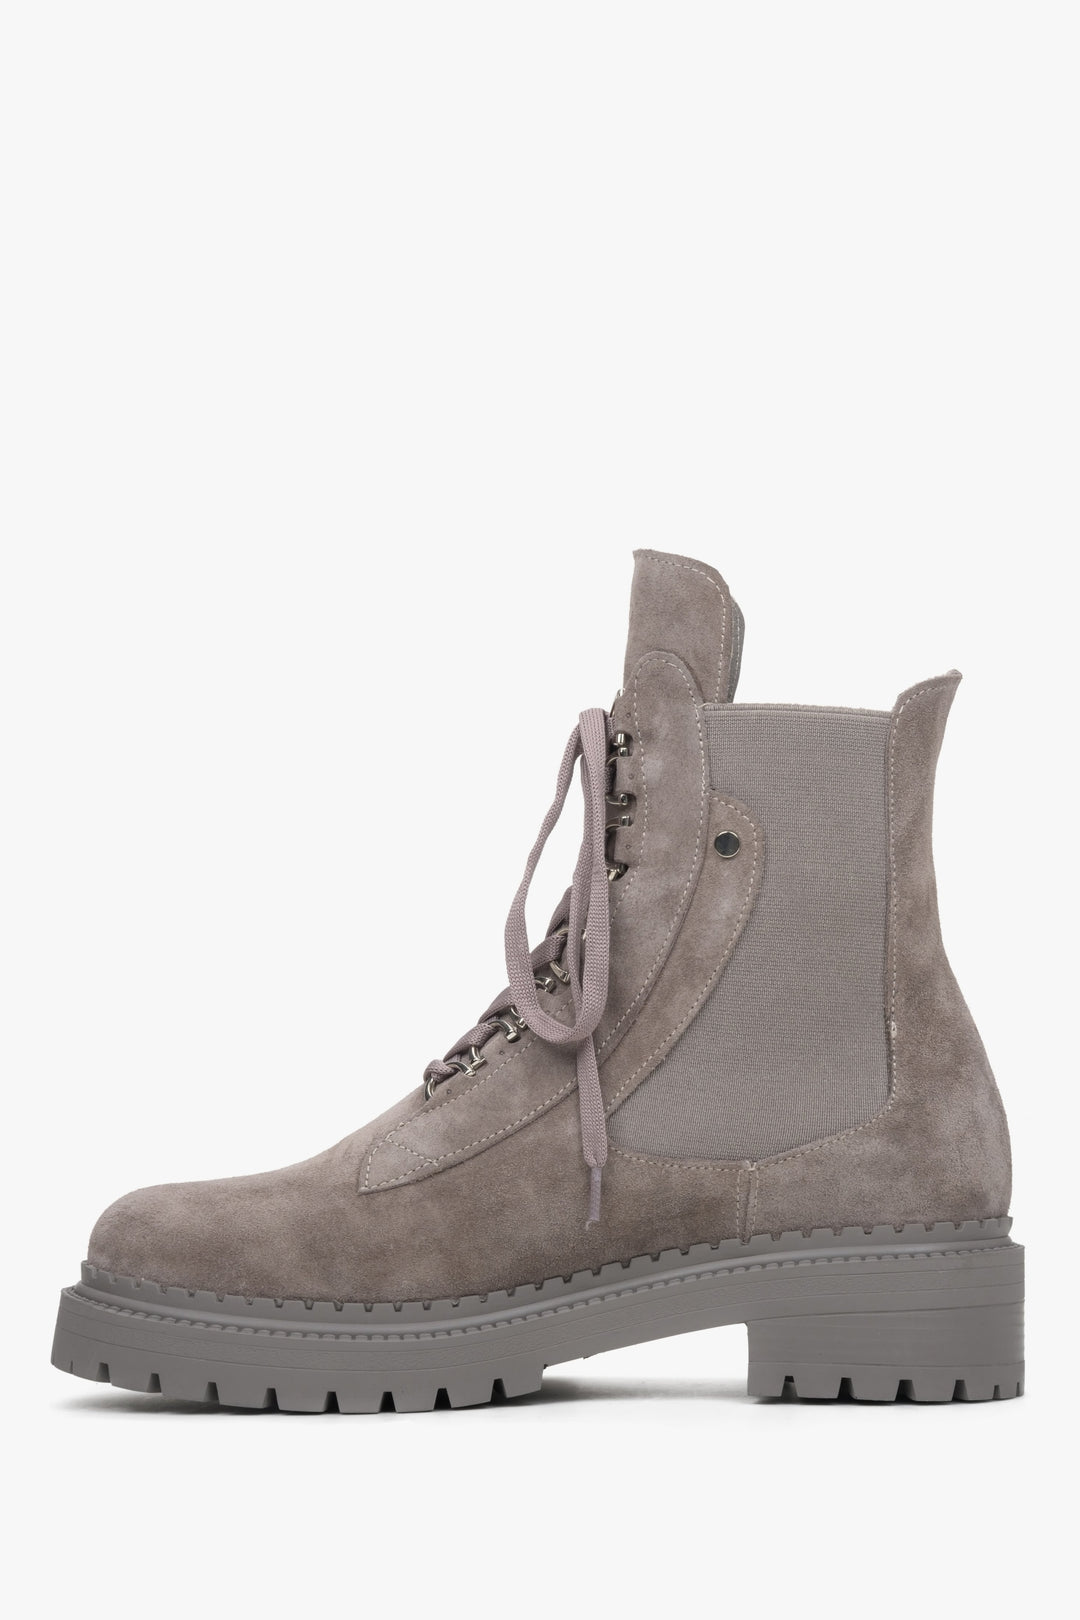 Women's lace-up ankle boots in grey Estro - shoe profile.